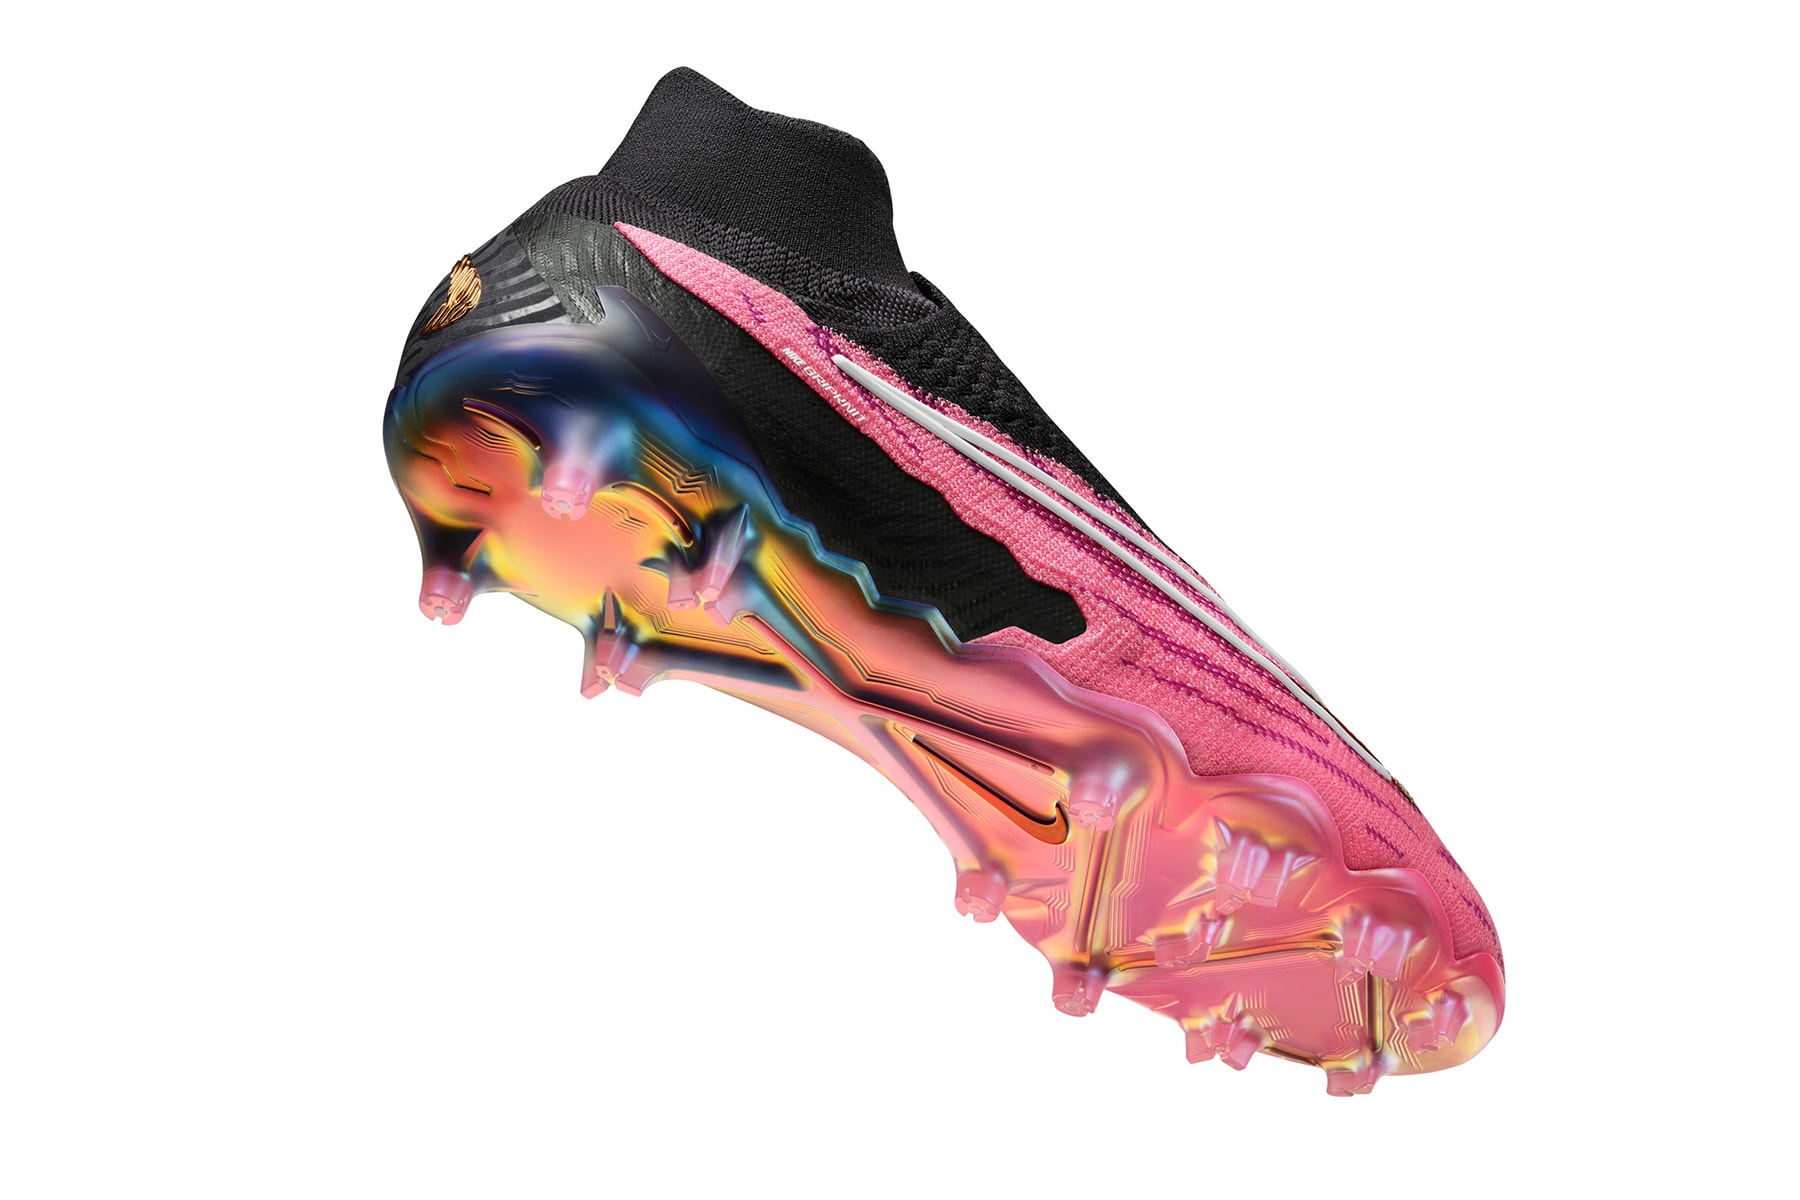 Nike Phantom GX soccer cleat football boot release soccer sports world cup Gripknit Ghost Lace  Phantom Vision 1 2